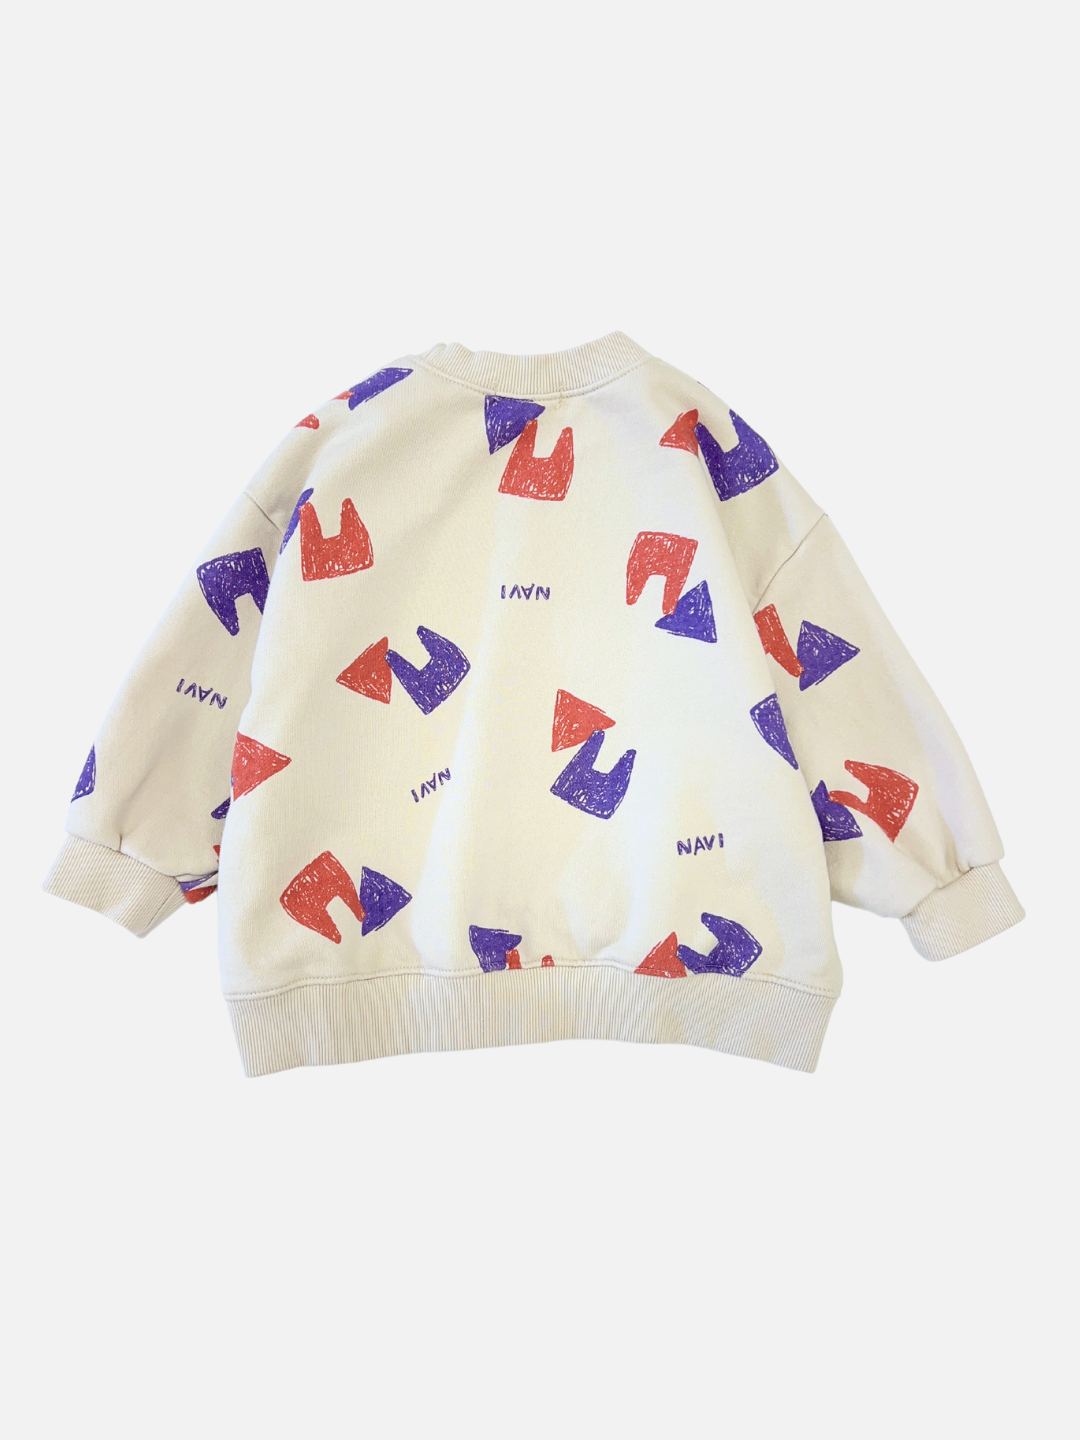 Oatmeal | Back view of kids beige crewneck sweatshirt with an all over pattern of red and purple shapes and the brand name Navi.